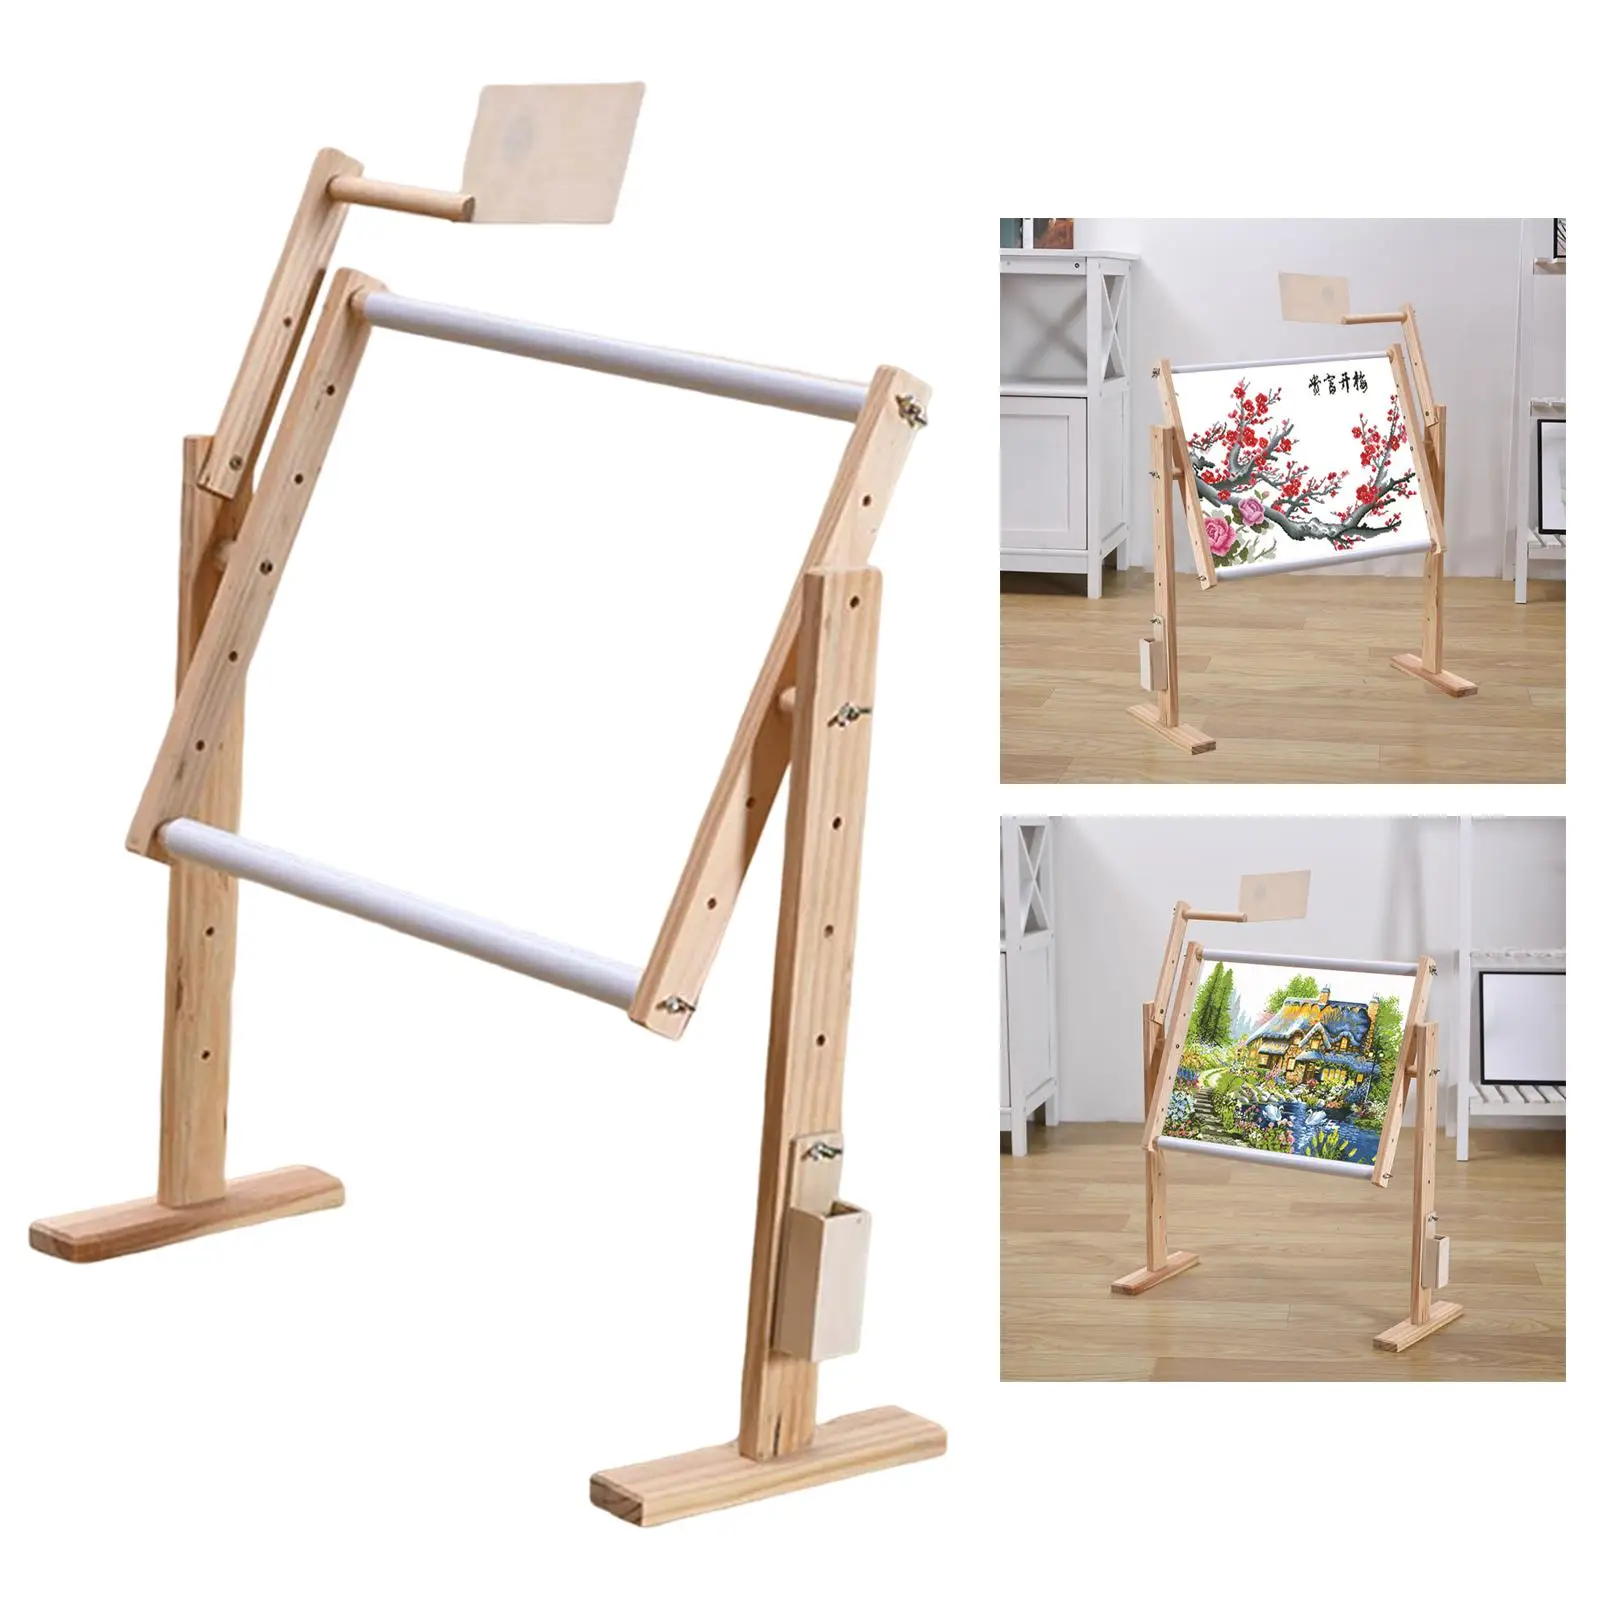 Adjustable Wood Embroidery Frame Stand Cross Stitch Rack Holder Embroidery Lap Stand Table Needlework Sewing Tools